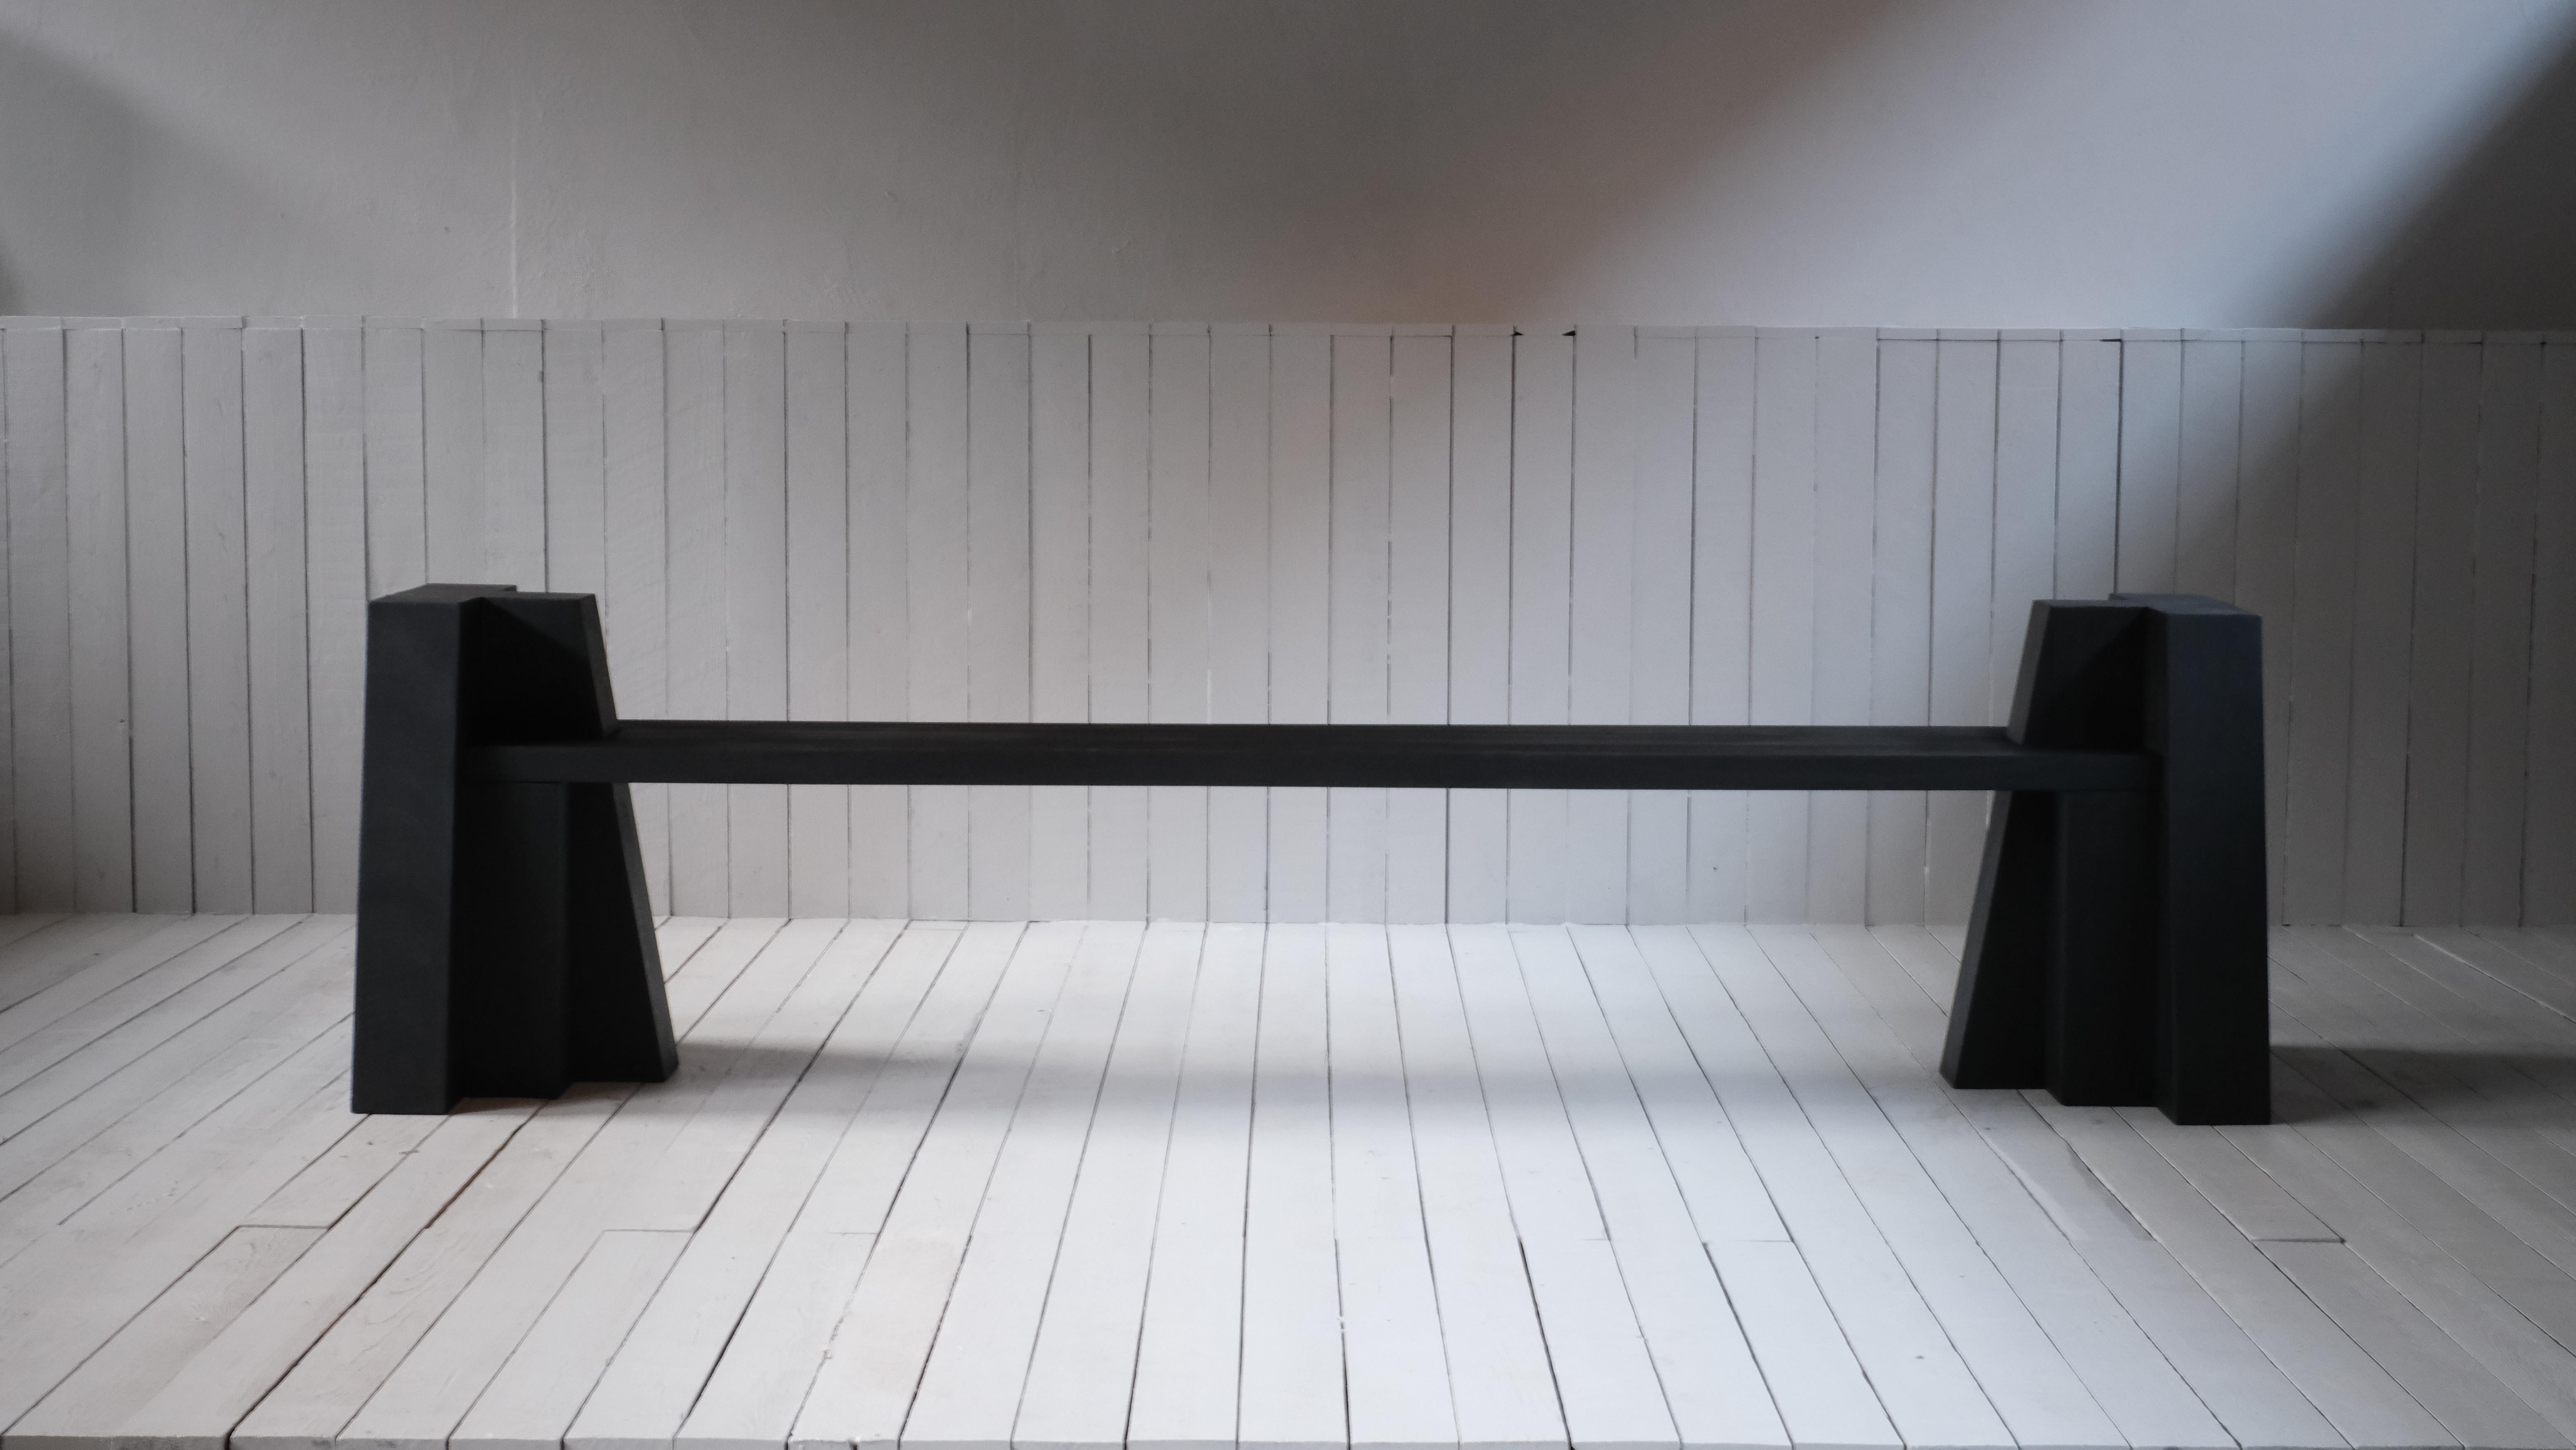 AD Bench in iroko wood by Arno Declercq
Dimensions: W 237 x L 60 x H 63 cm 
Materials: Burned and waxed iroko wood 

   

Arno Declercq
Belgian designer and art dealer who makes bespoke objects with passion for design, atmosphere, history and craft.